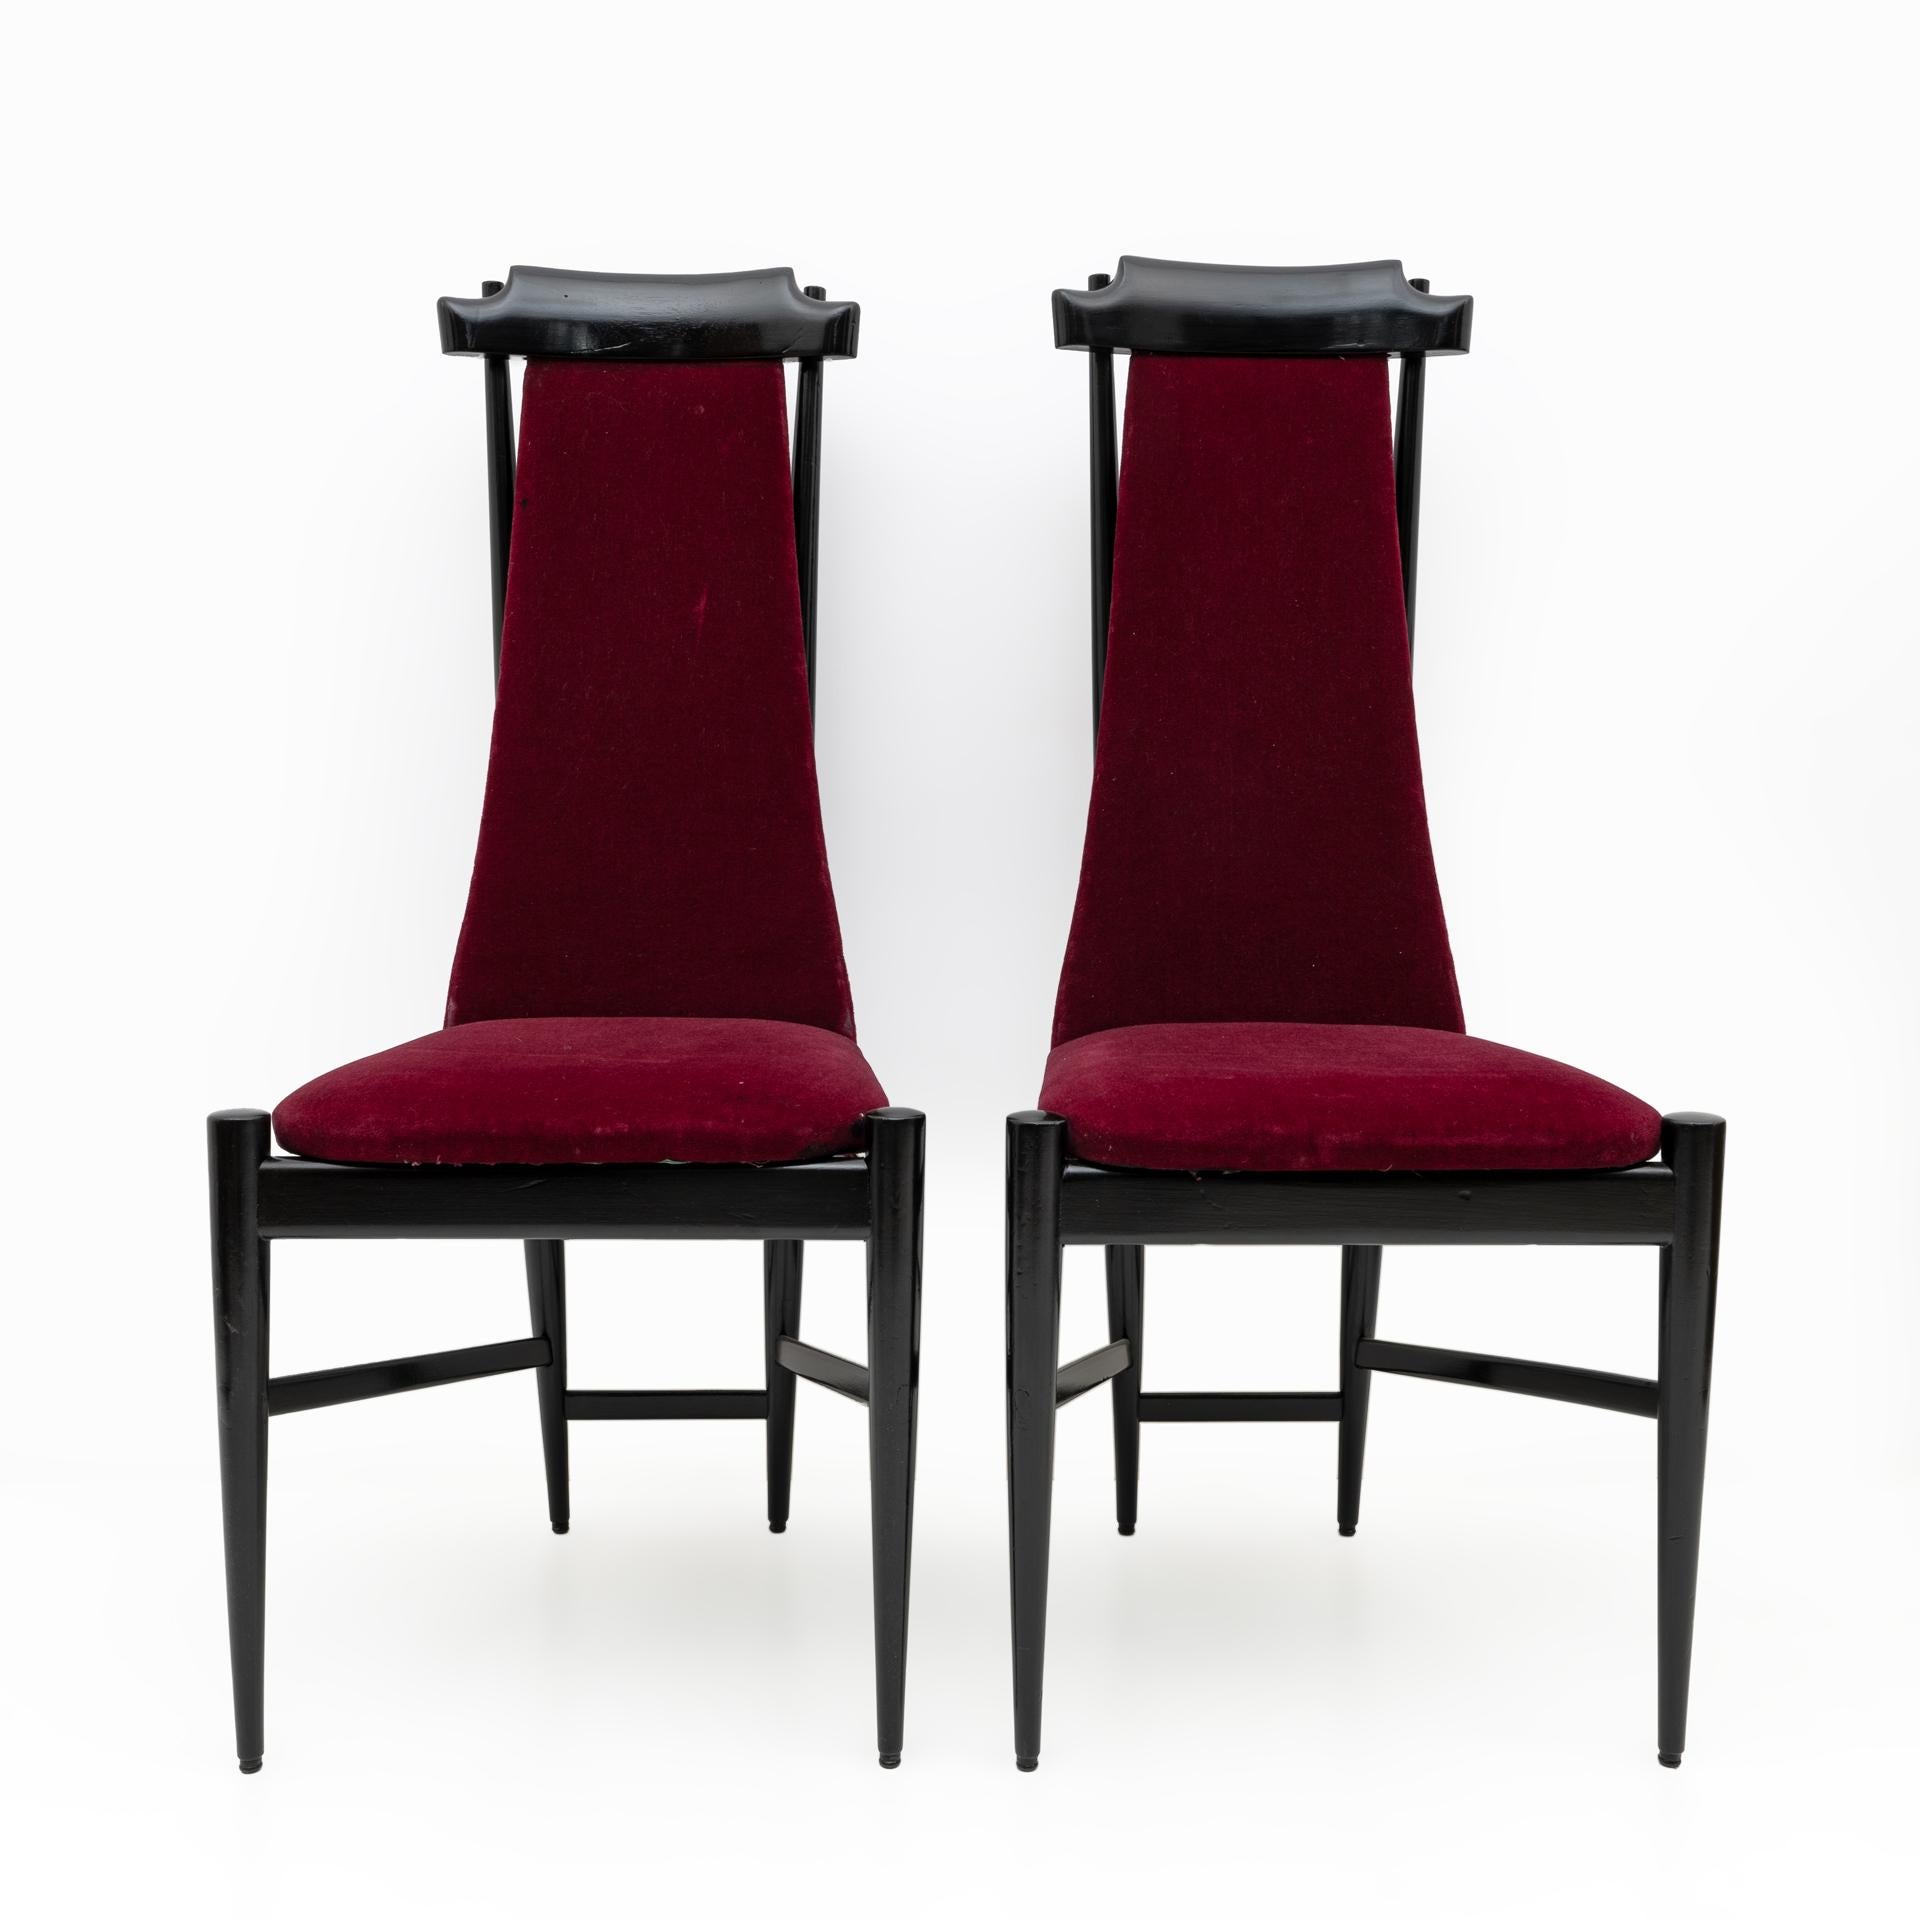 Pair of modernist chairs by the pioneer of Carioca design Sérgio Rodrigues, in ebonized beech wood covered in velvet. The chairs synthesize a unique combination of Shaker, De Stijl and Japanese influences. Rodrigues reinterprets them through a